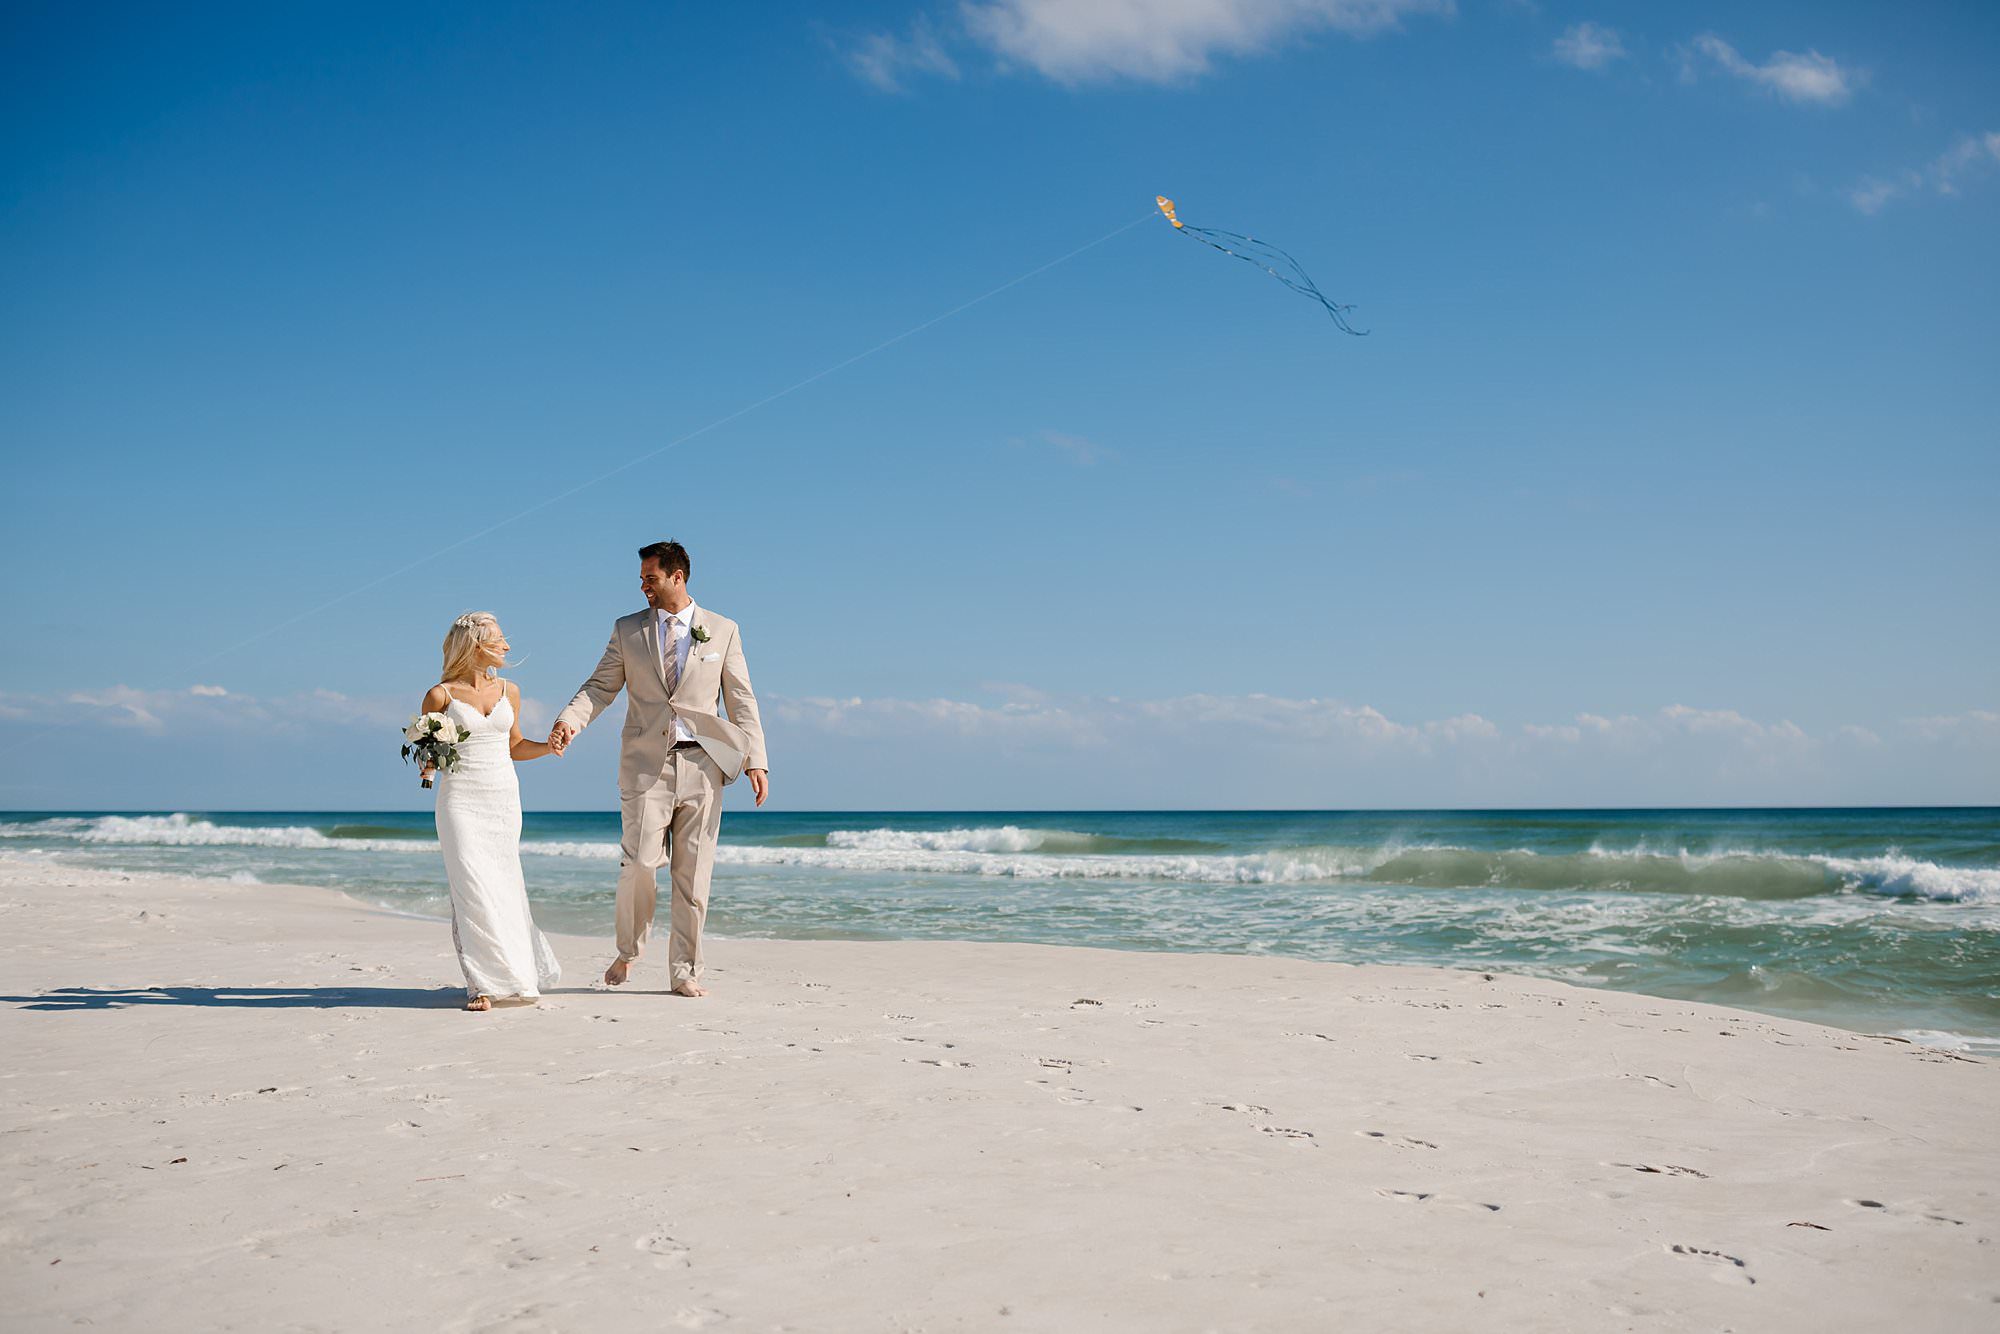 Bride and Groom walking along the waters edge while a yellow kite flys over Gulf of Mexico